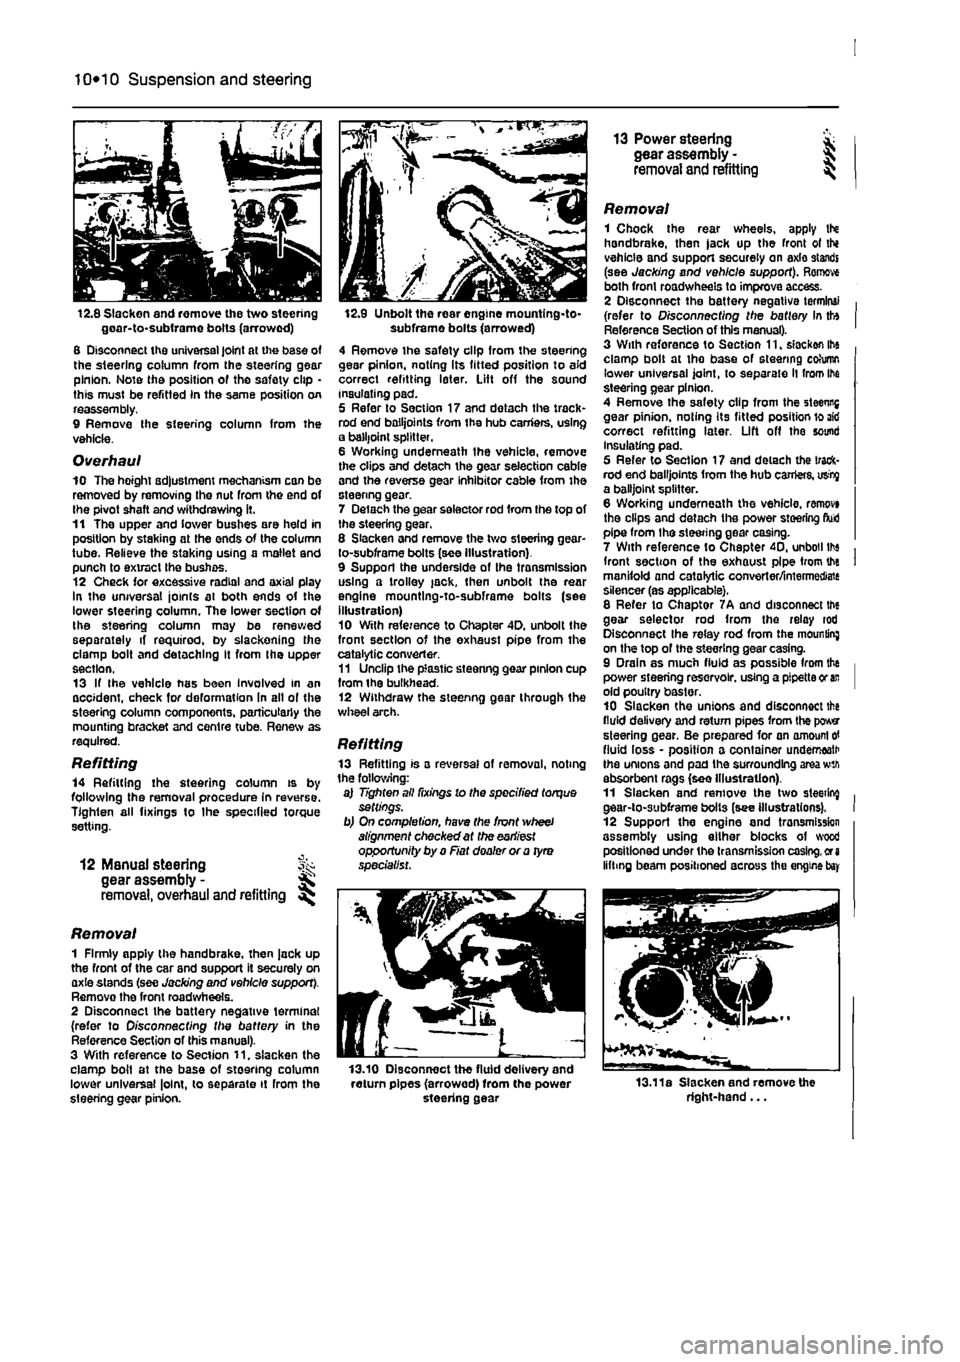 FIAT PUNTO 1999 176 / 1.G Service Manual 
10*10 Suspension and steering 
12.8 Slacken and remove the two steering goar-to-subirame bolts (arrowed) 8 Disconnect the universal joint at the base of the steering column from the steering gear pin